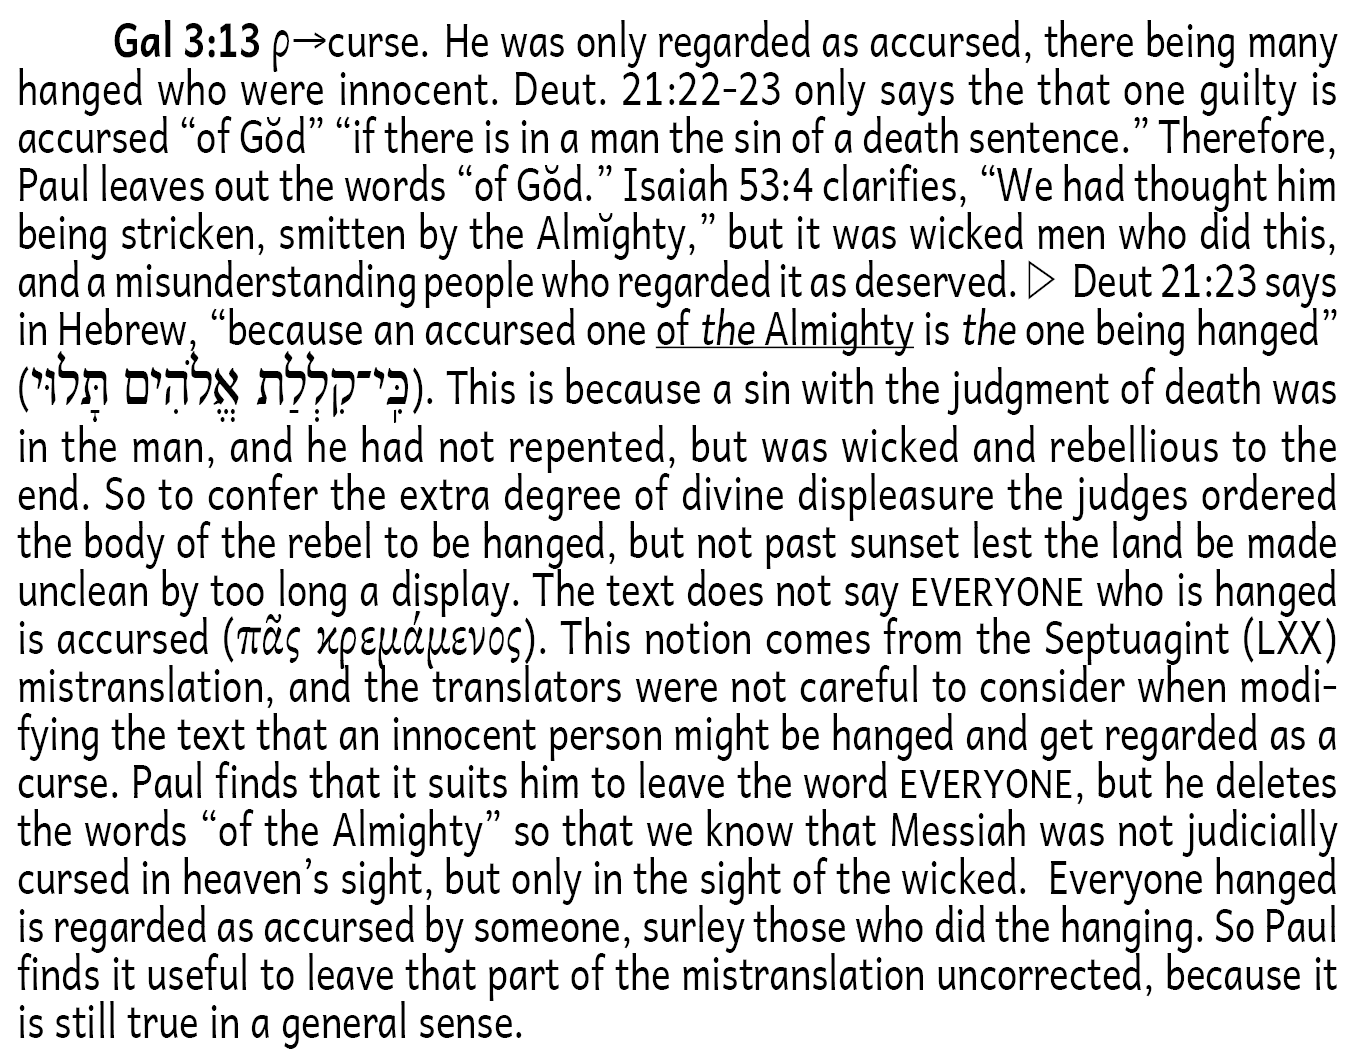 Galatians Notes from page 613